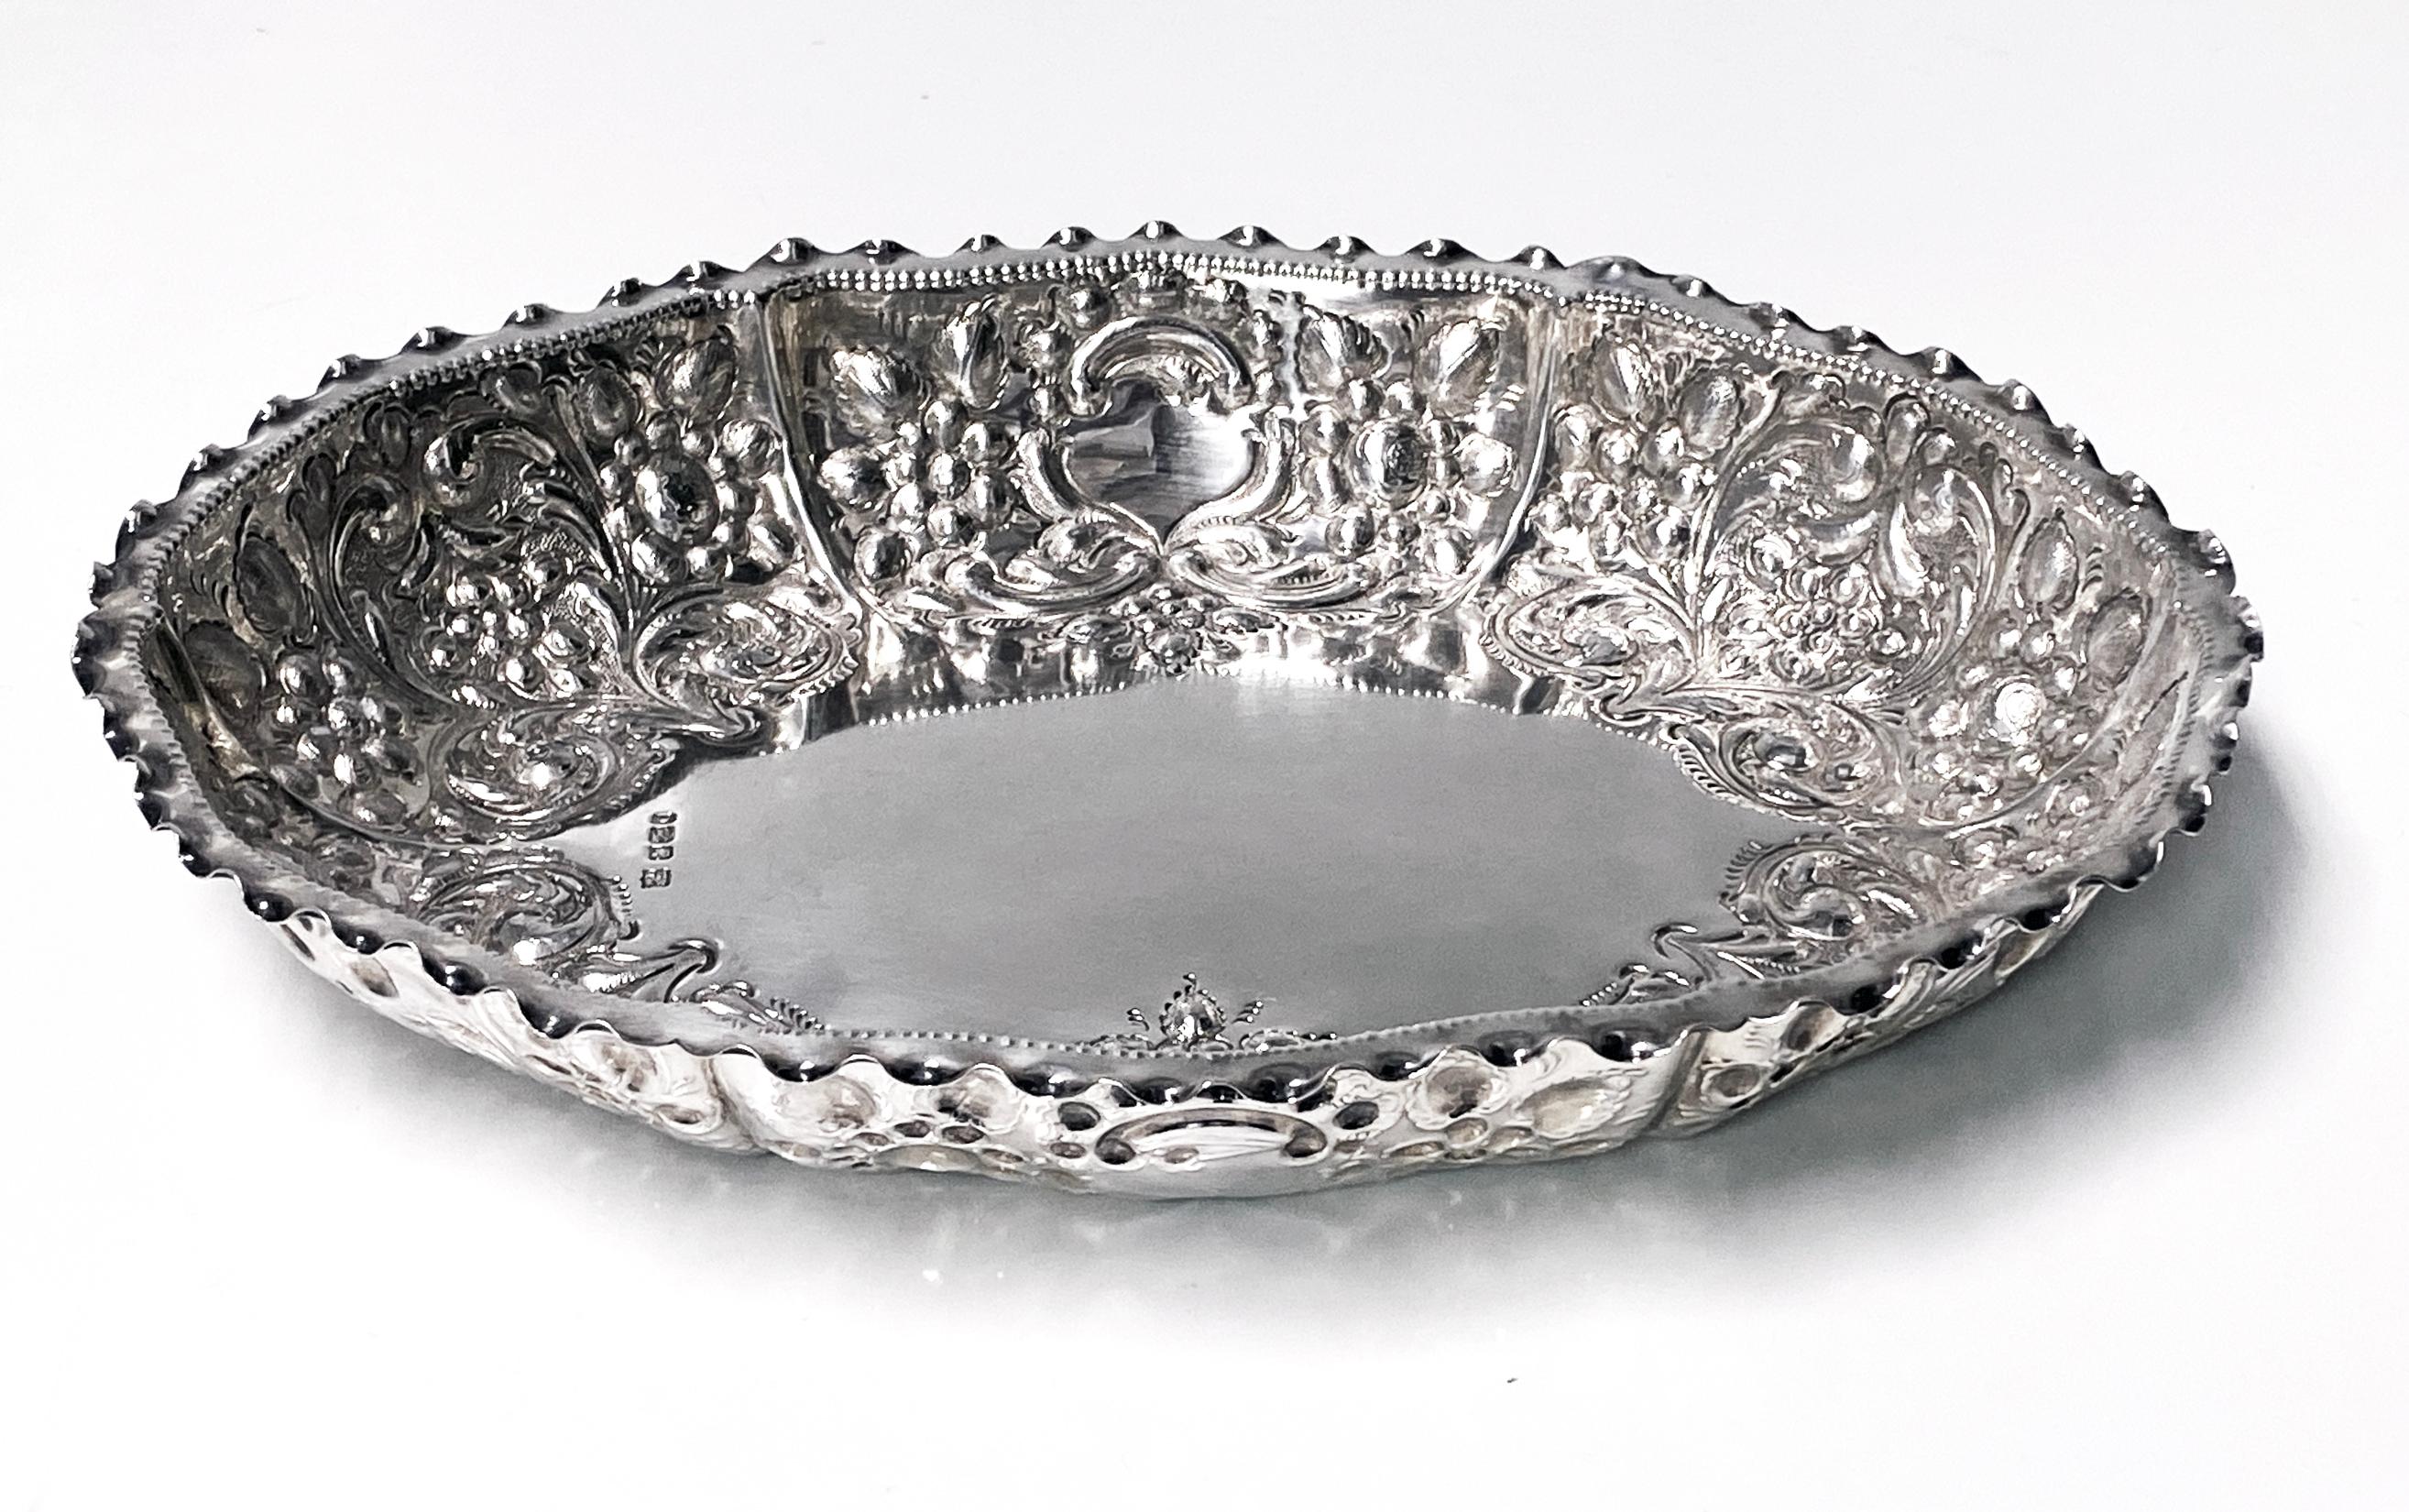 Antique English Sterling Silver Fruit Dish 1895 William Padley. The oval shape Dish with richly decorated chased embossed and engraved foliage fruit decoration and plain centre, crimped scalloped border. Full hallmarks for Sterling Silver from city